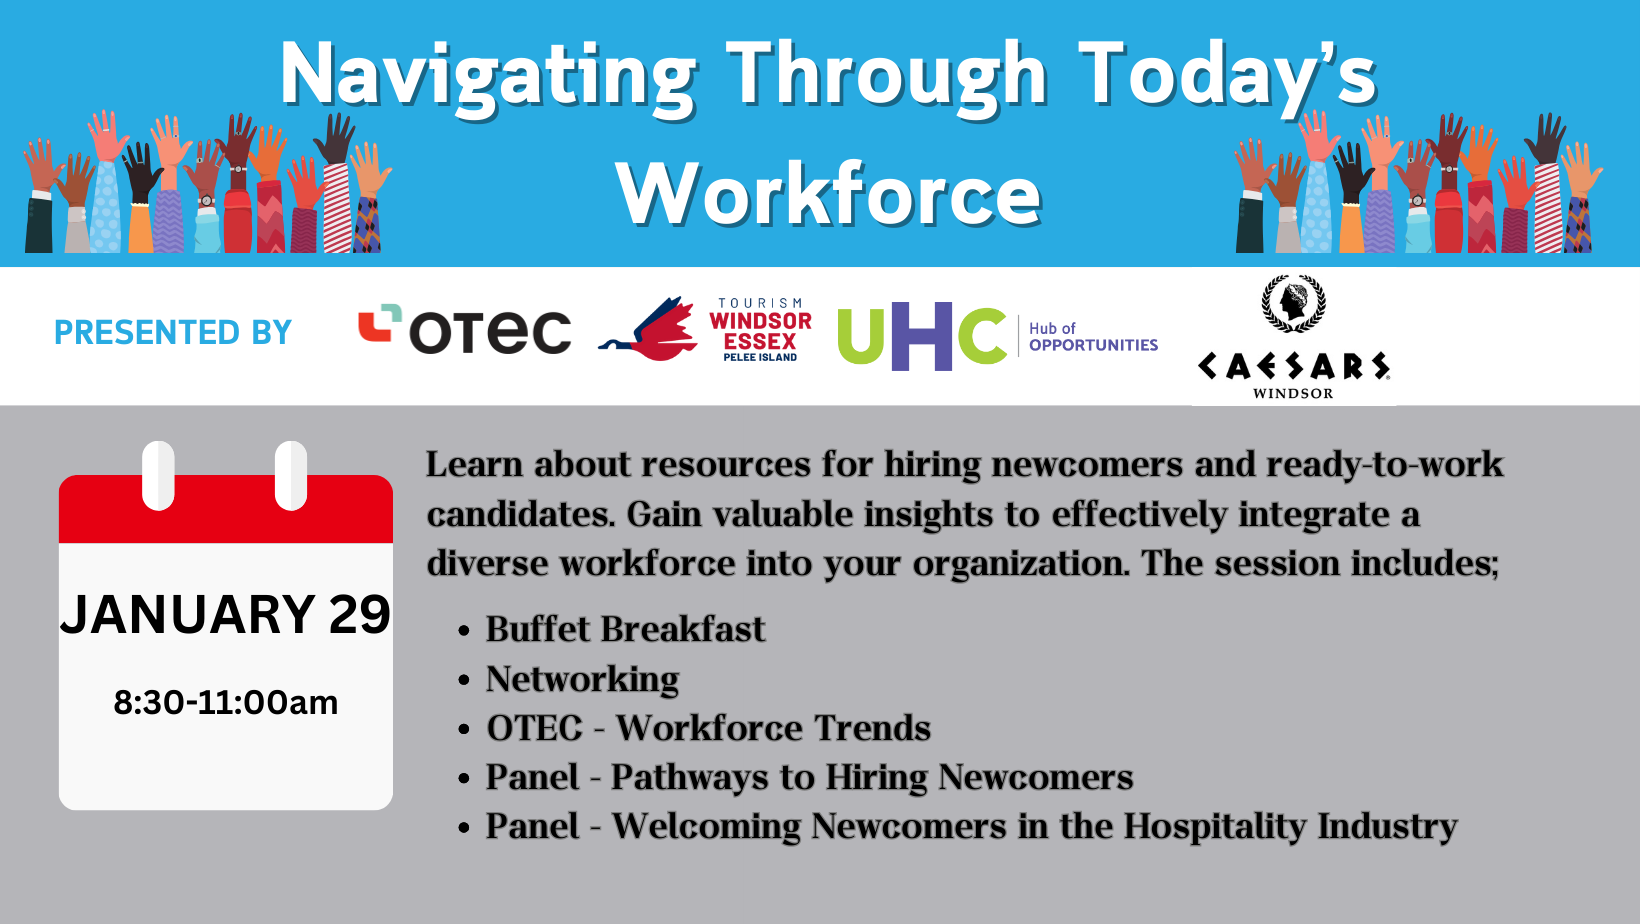 Navigating Today's Workforce: An Employer Information Session